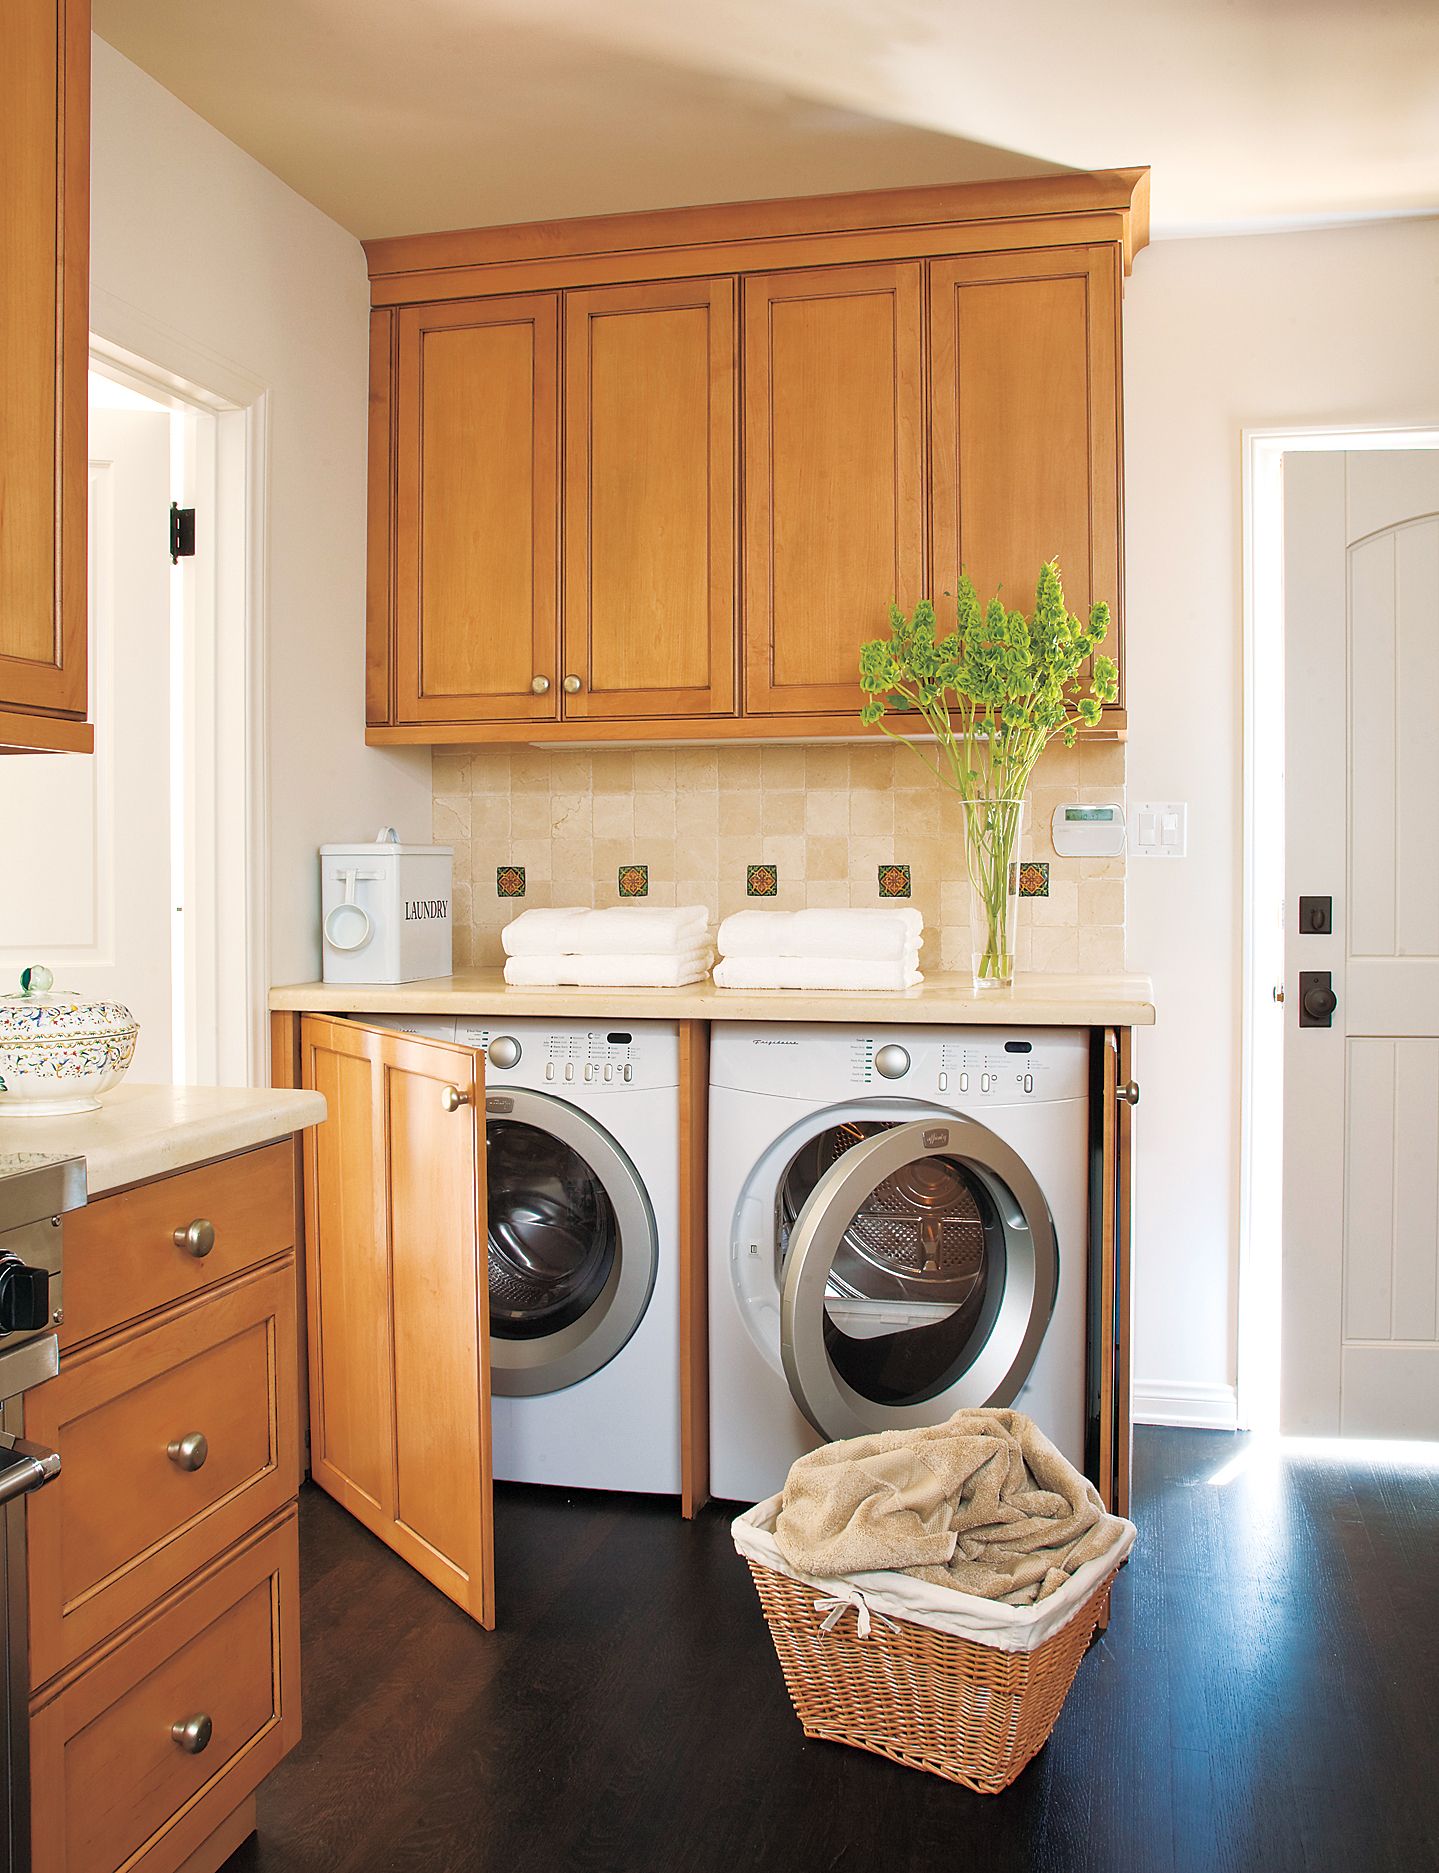 27 ideas for a fully loaded laundry room - this old house